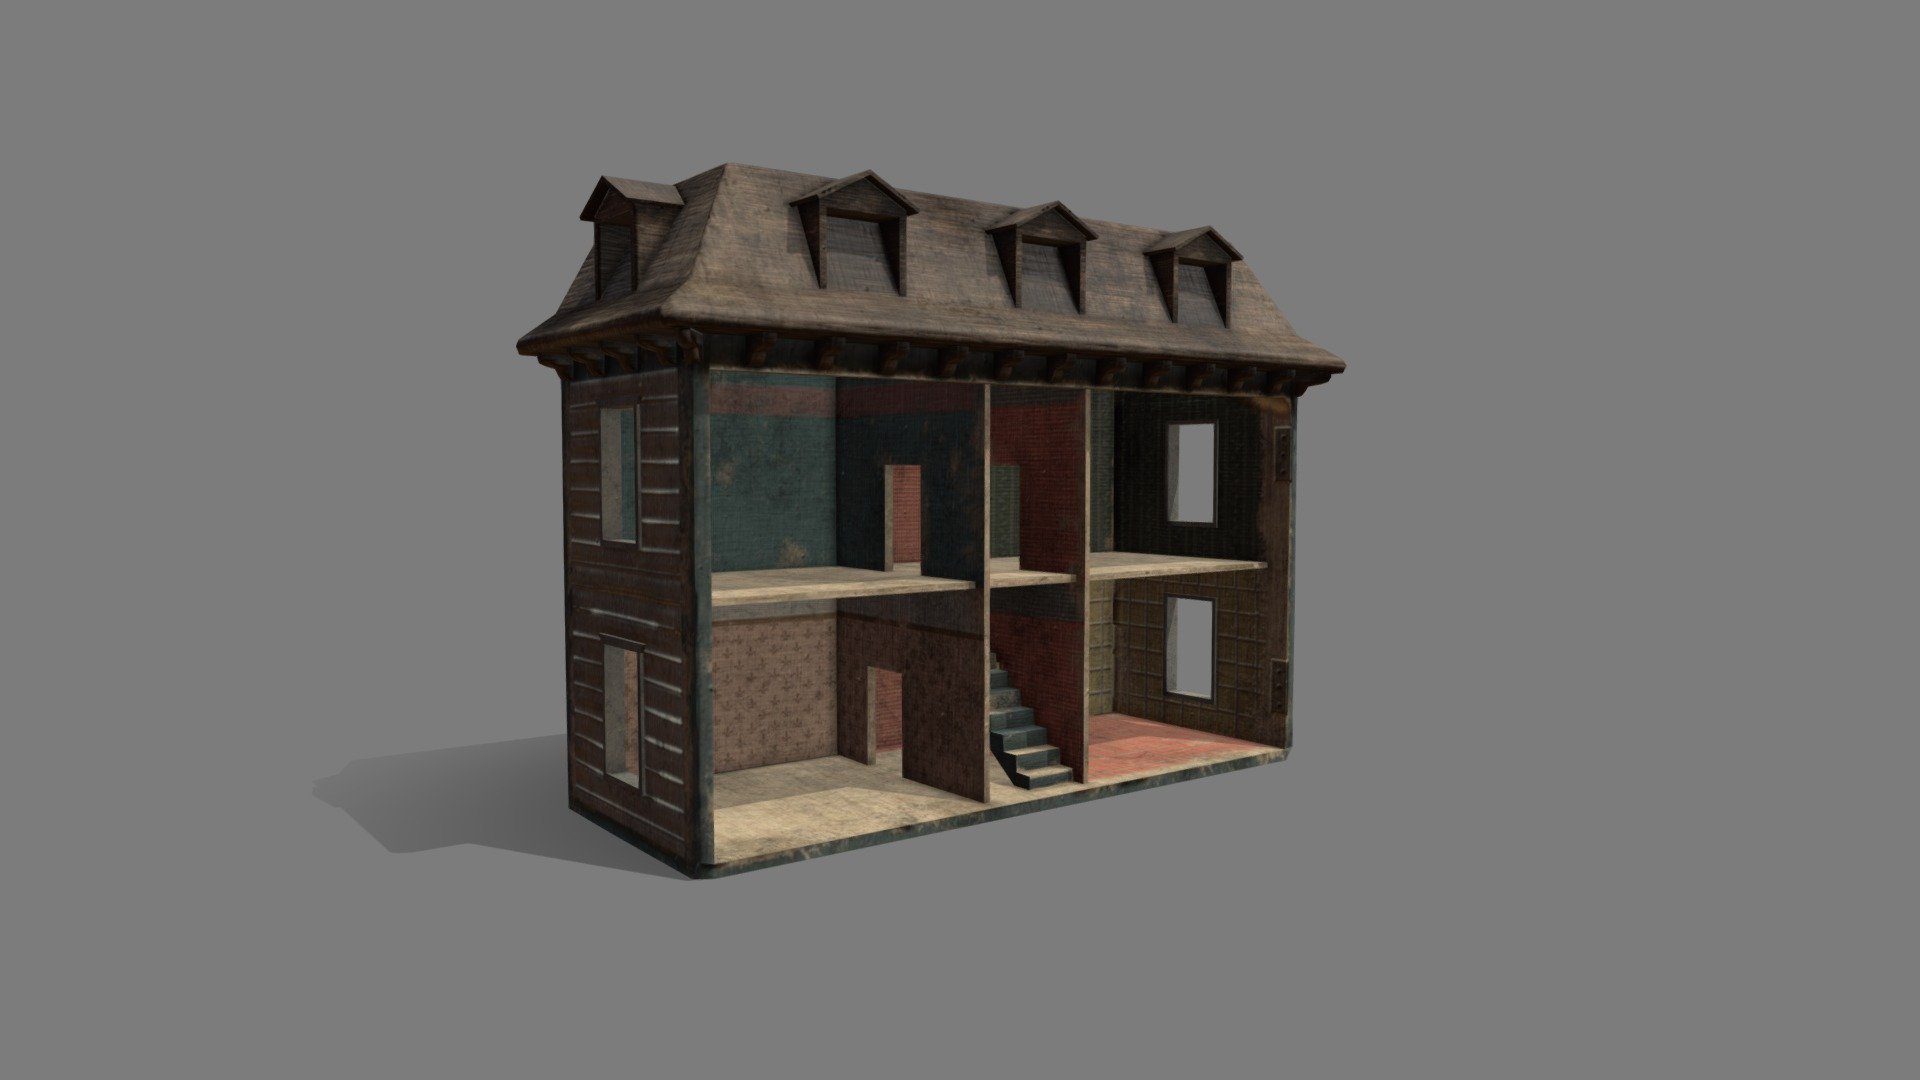 Here is an old and damaged dolls house I recently made for a personal project 3d model